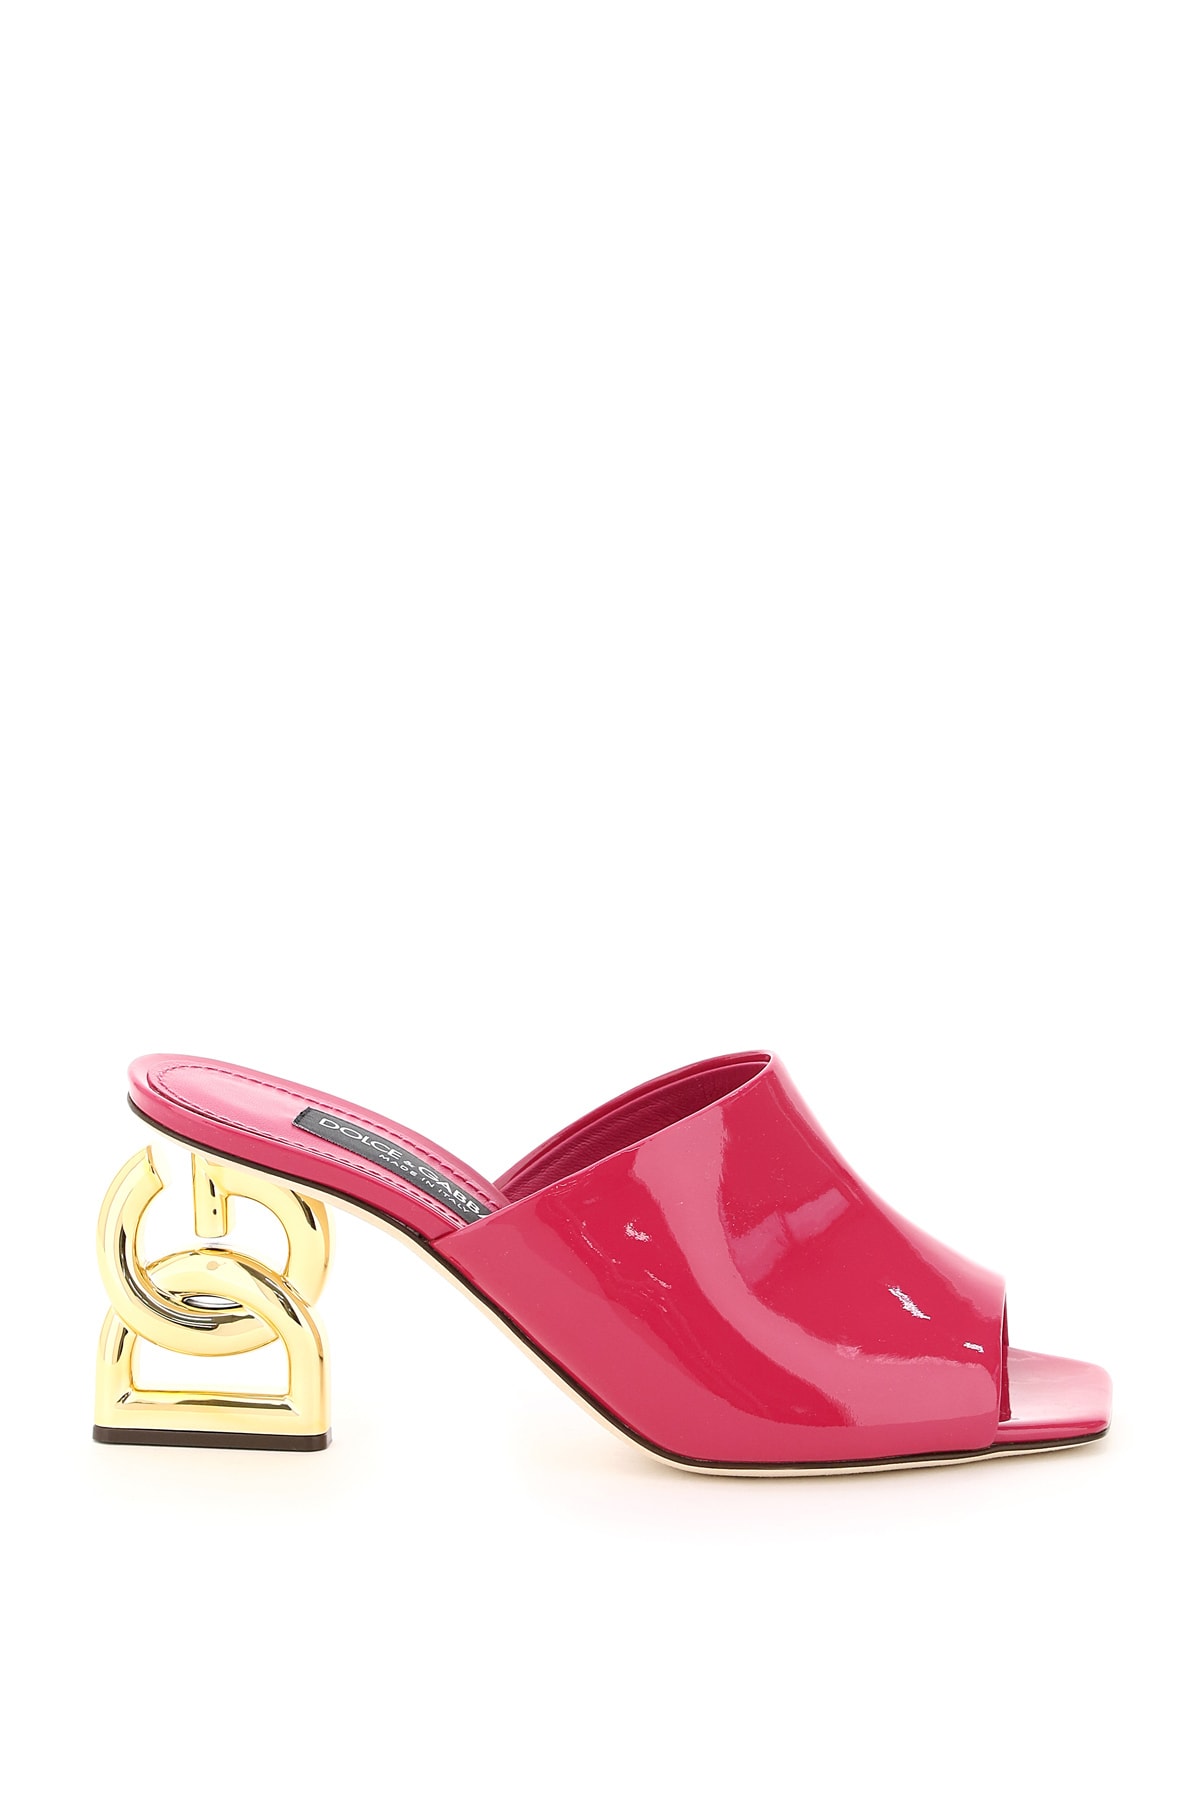 Buy Dolce & Gabbana Mule With Dg Pop Heel online, shop Dolce & Gabbana shoes with free shipping